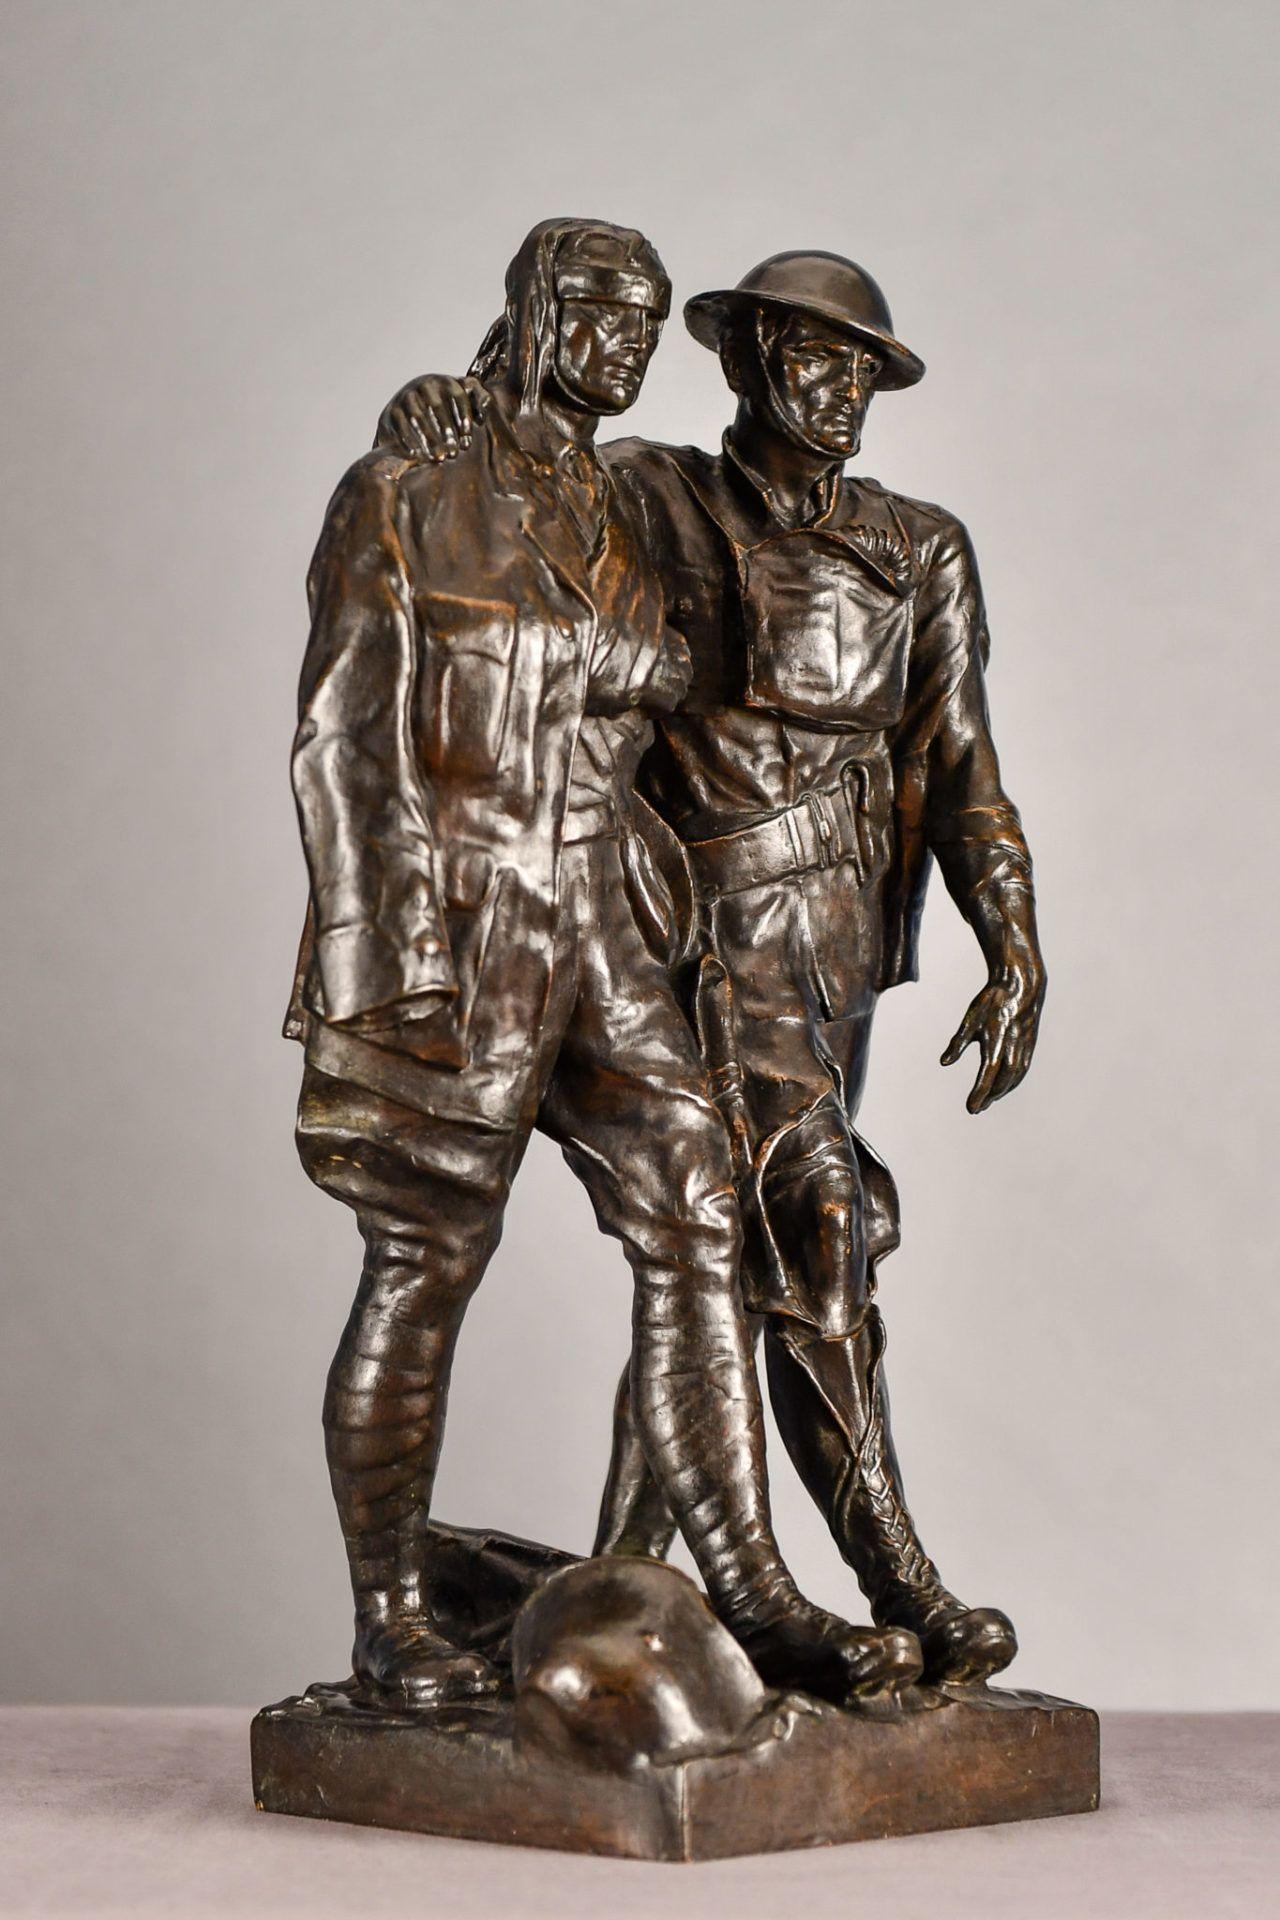 Comrades in Arms (Brothers in Arms), Robert Ingersoll Aitken, World War I Bronze 1